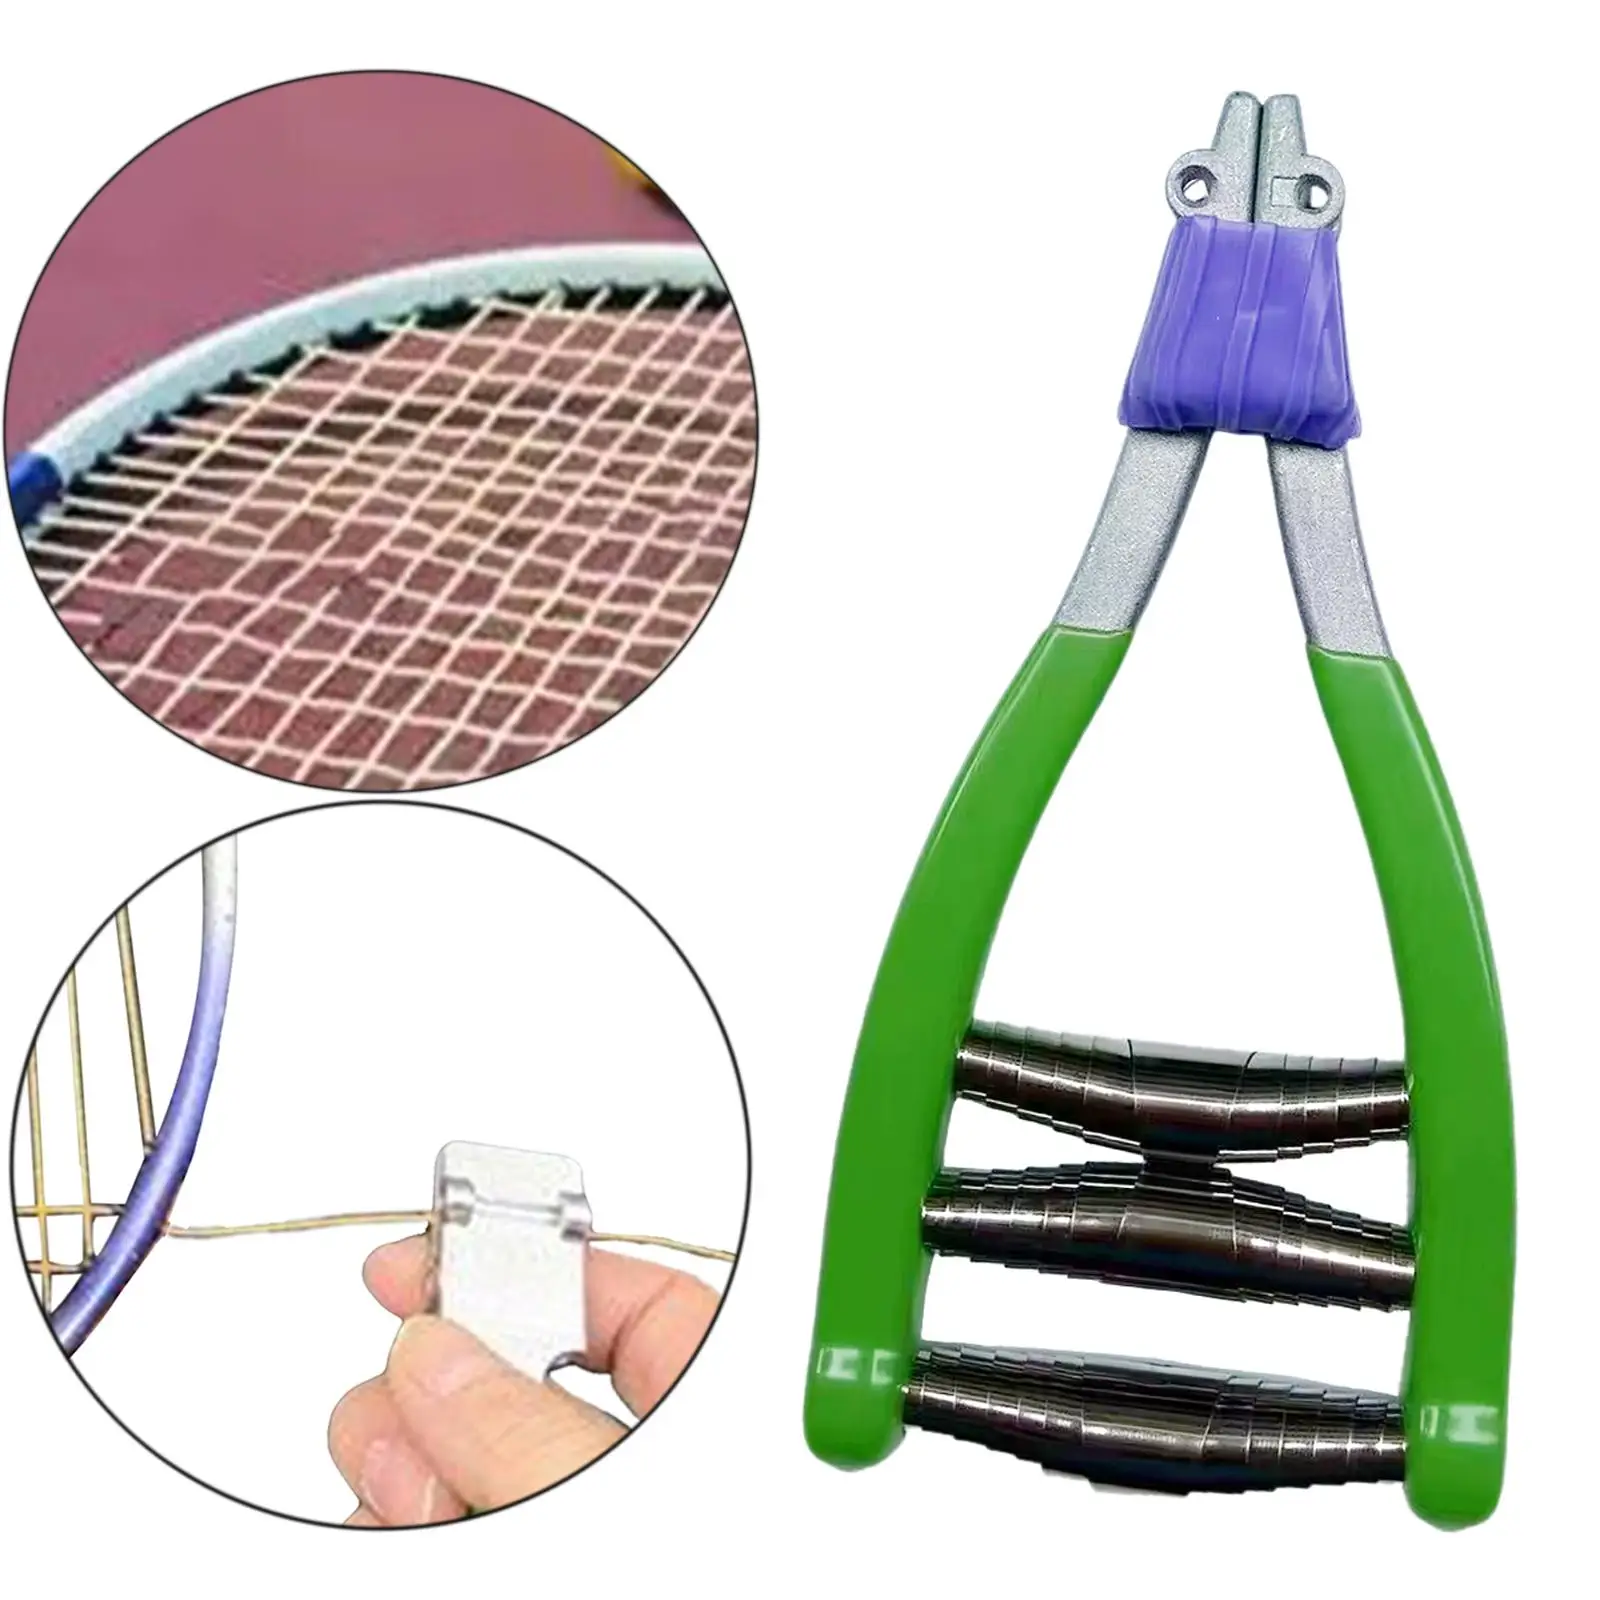 Professional Wide Head Starting Clamp Stringing Tool for Badminton Racket Tennis Racquet Squash Manual Tools Pliers